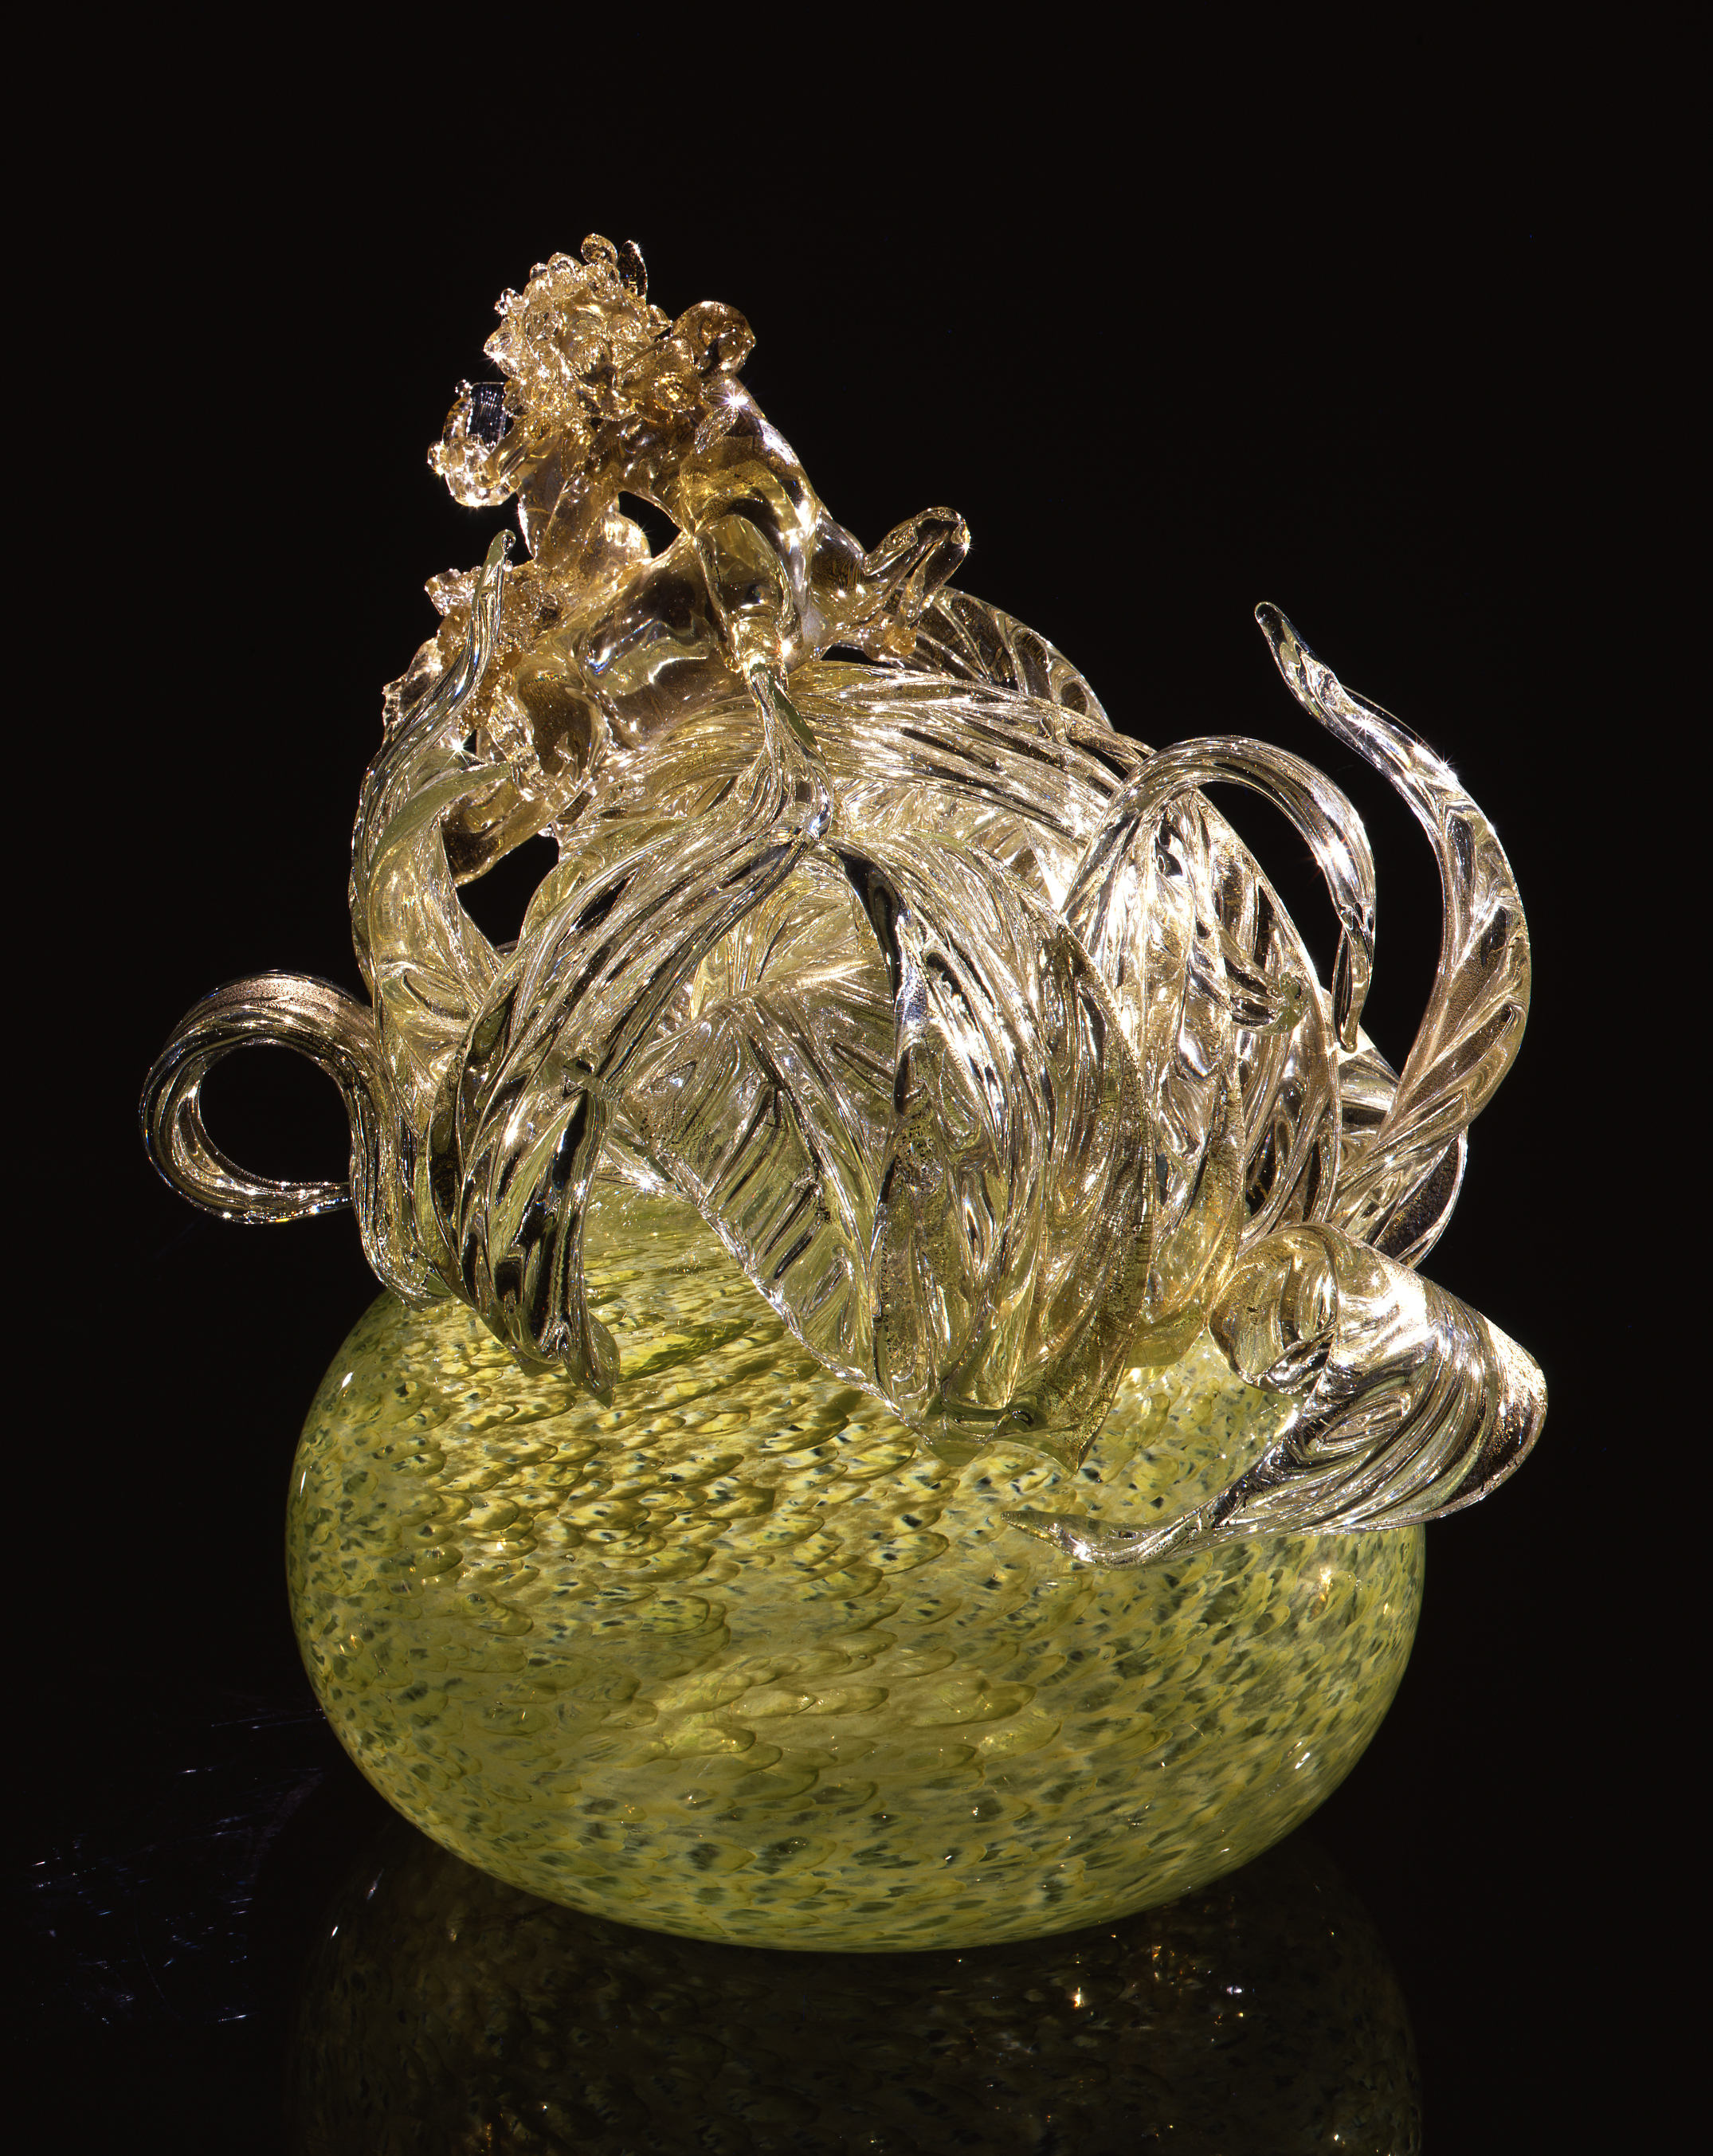  Dale Chihuly,&nbsp; Fountain Green Putti Venetian with Gilt Leaves and Centaur&nbsp; (1993, glass, 18 x 16 x 17&nbsp;inches) 